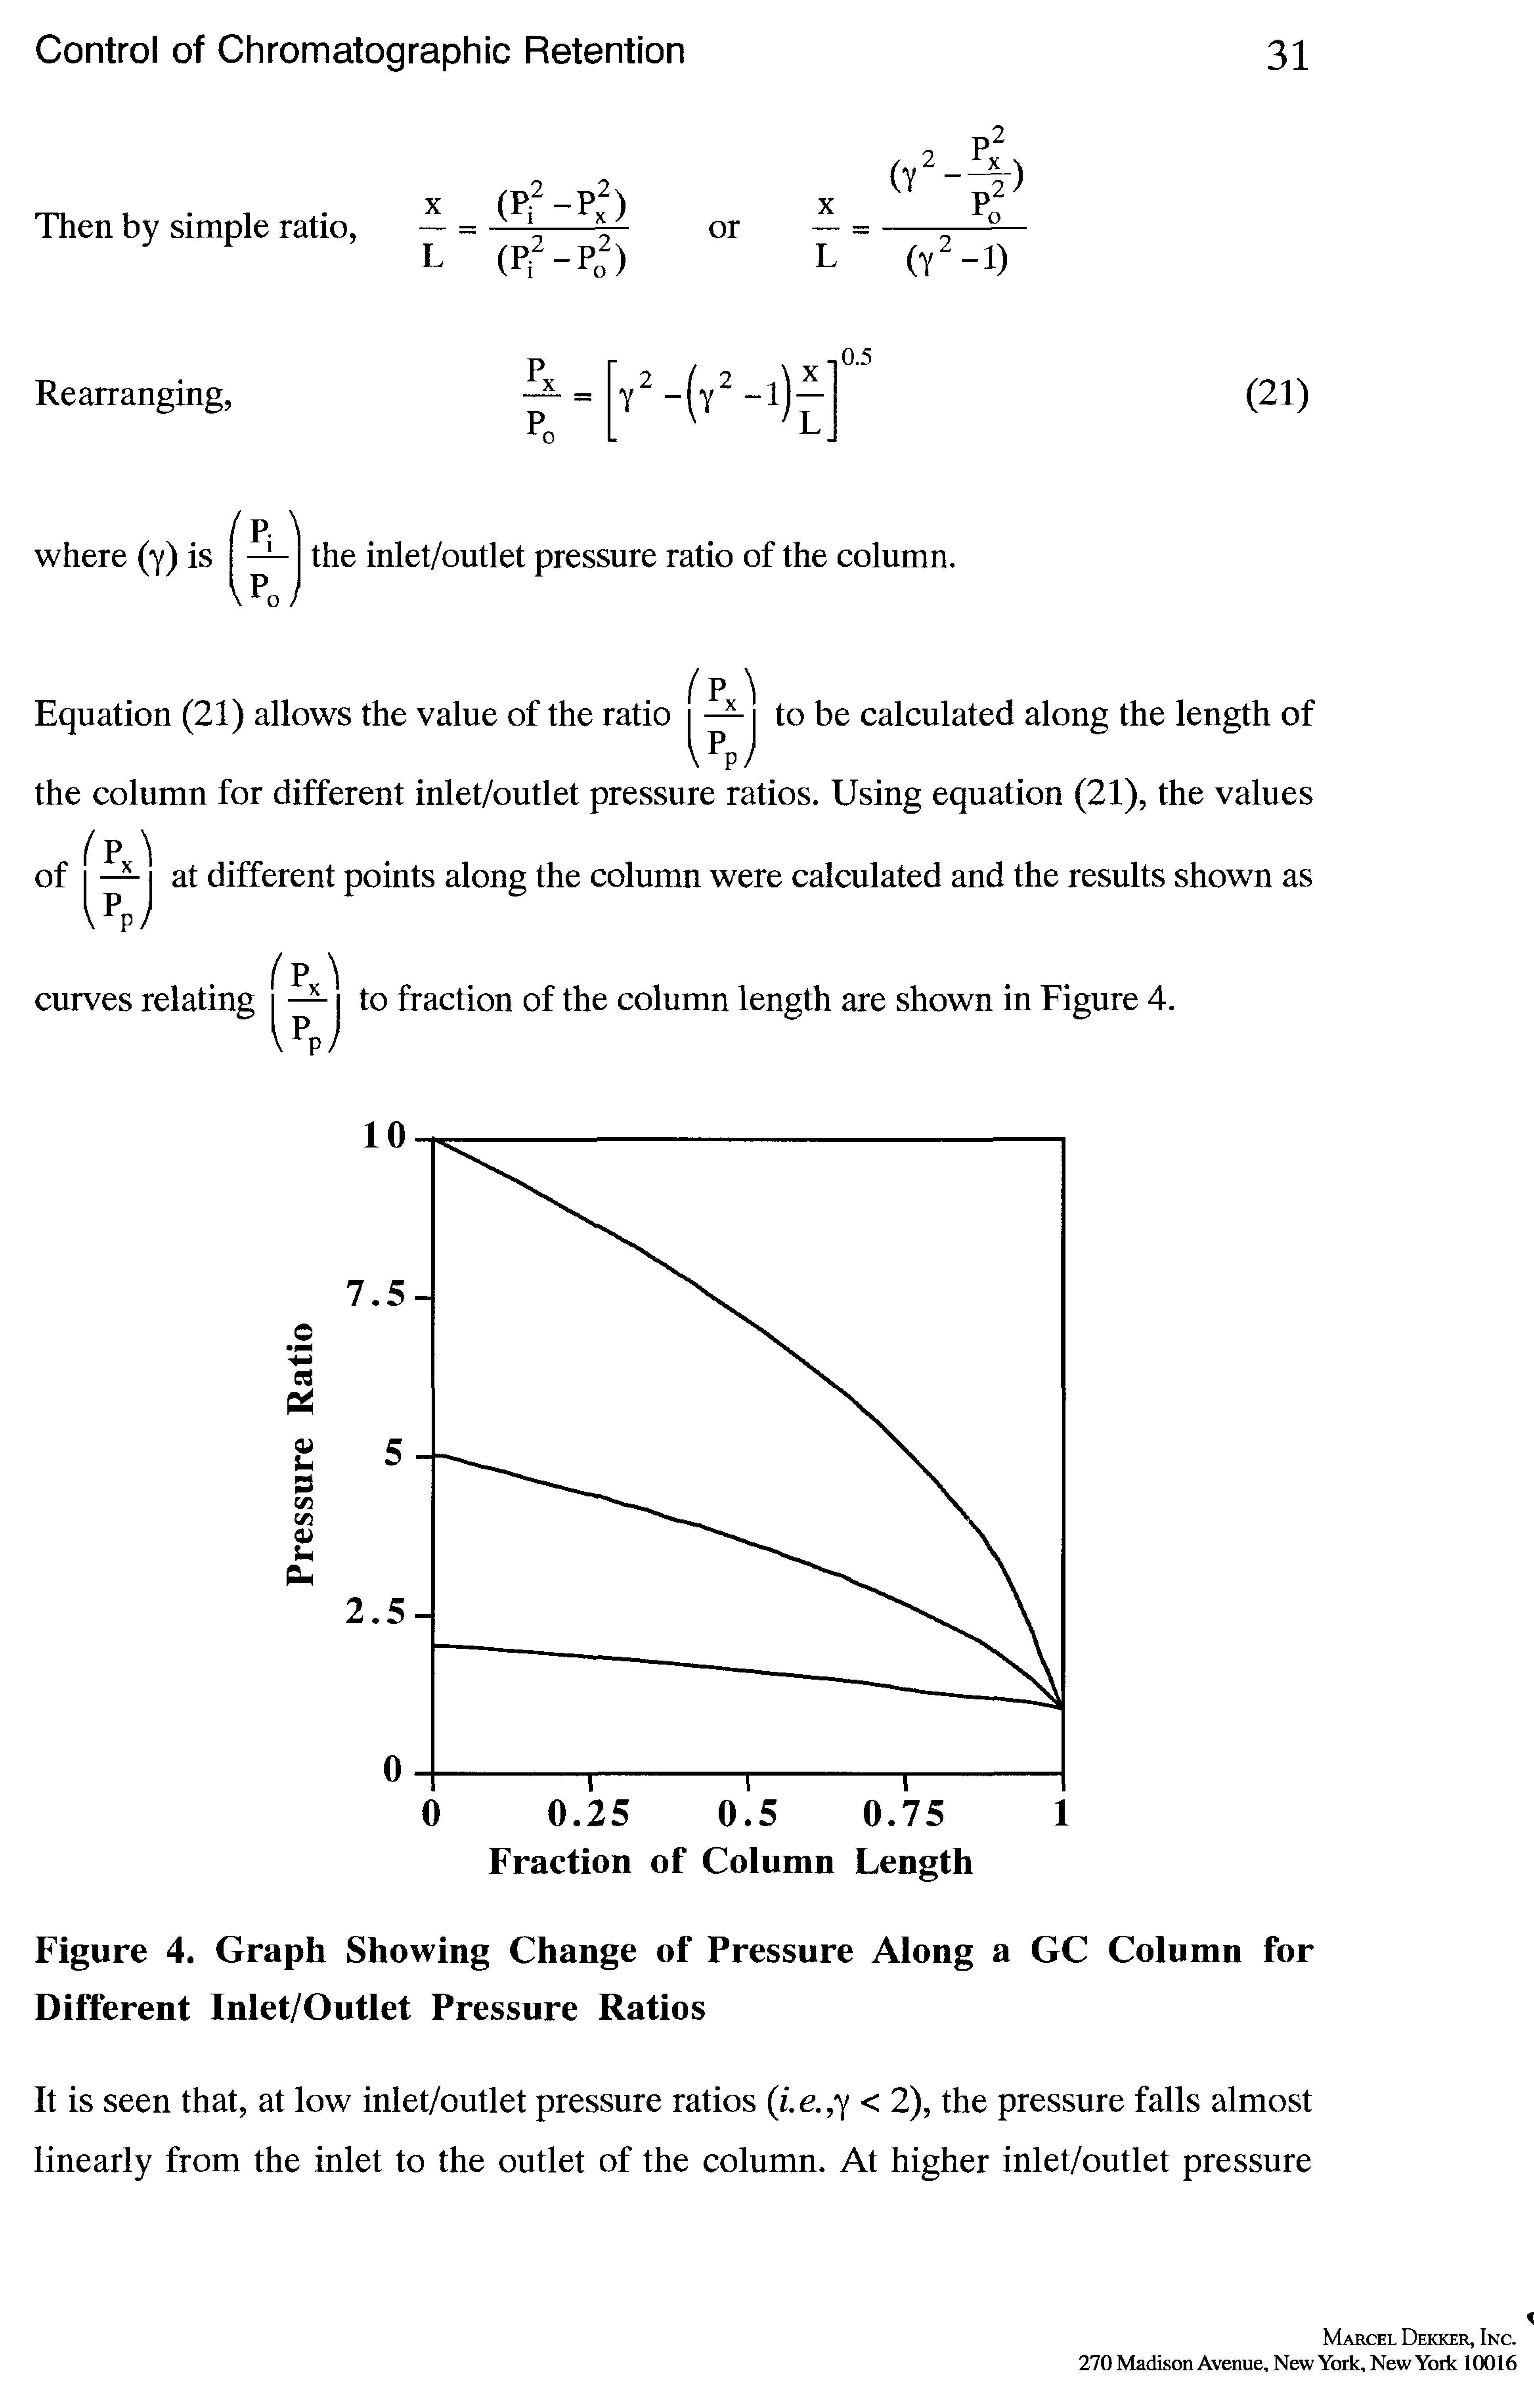 Figure 4. Graph Showing Change of Pressure Along a GC Column for Different Inlet/Outlet Pressure Ratios...